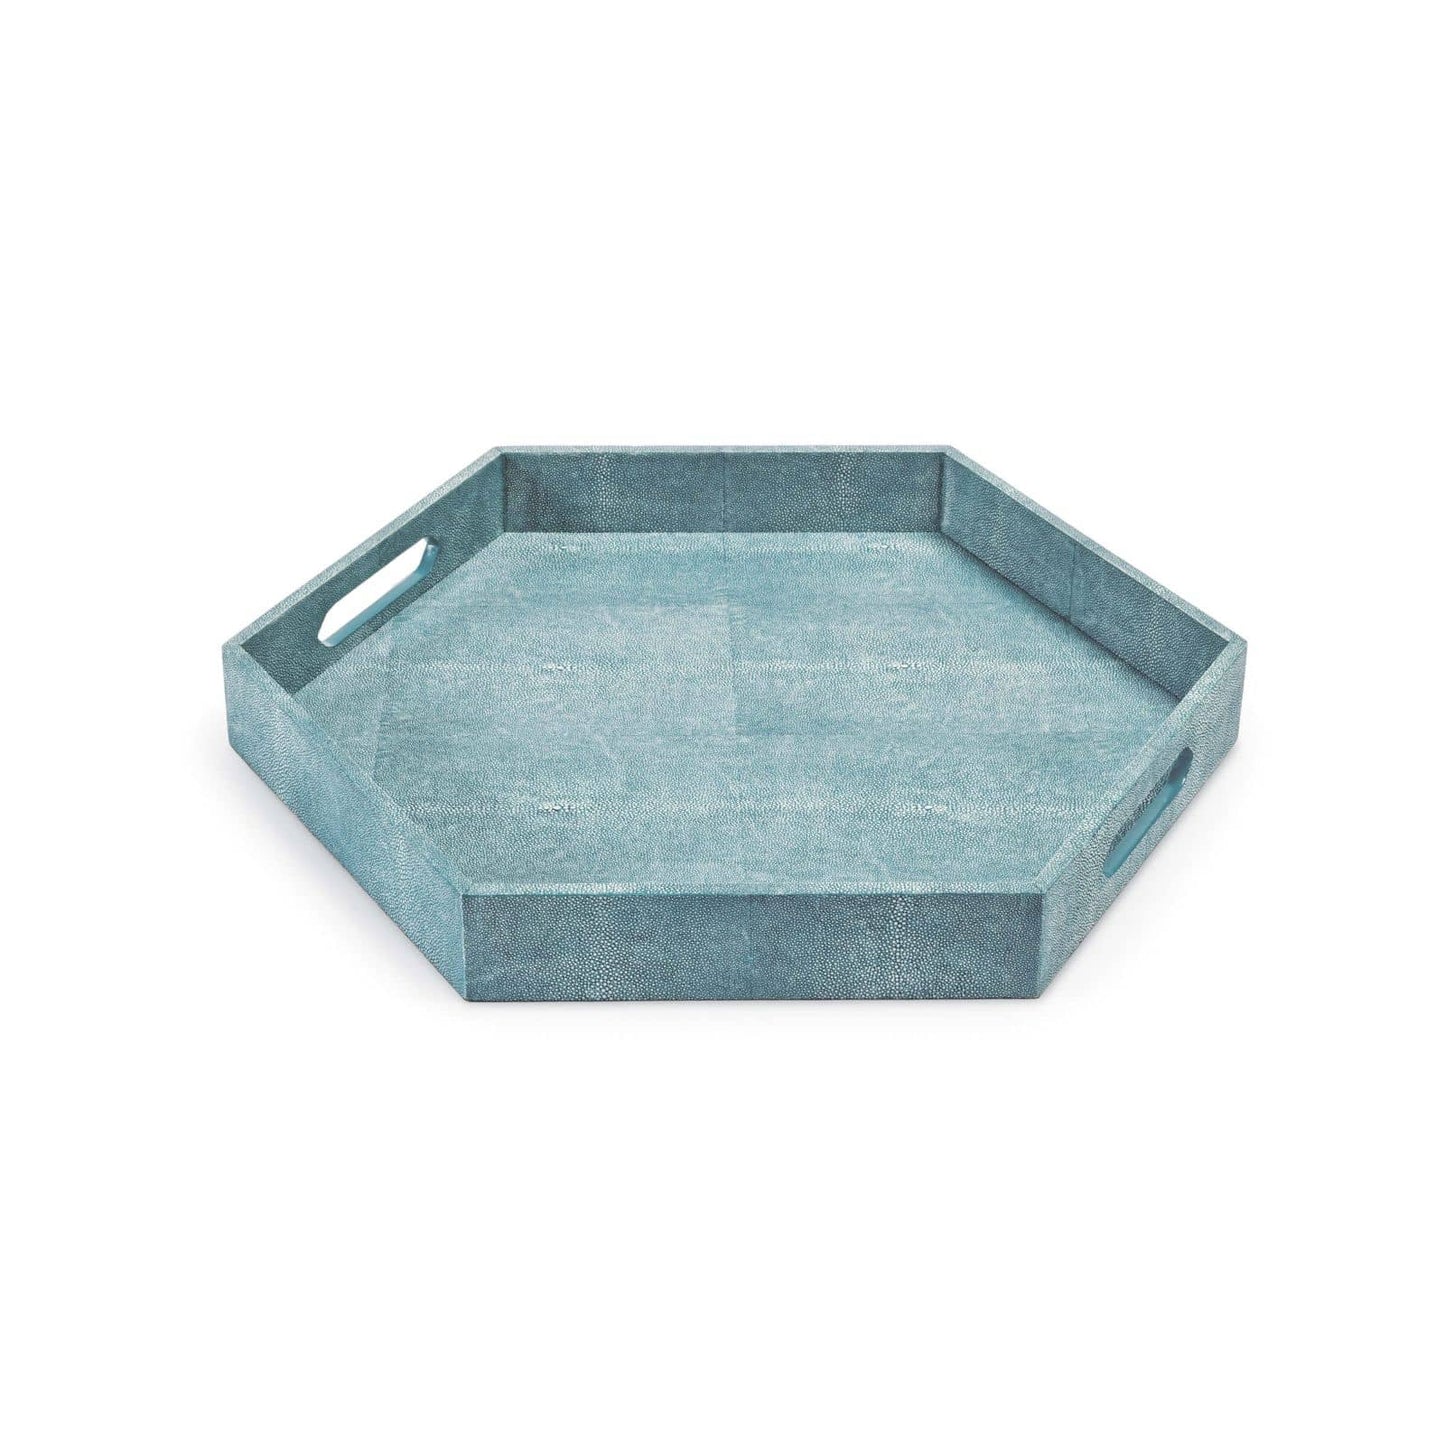 Shagreen Hex Tray in Turquoise by Regina Andrew